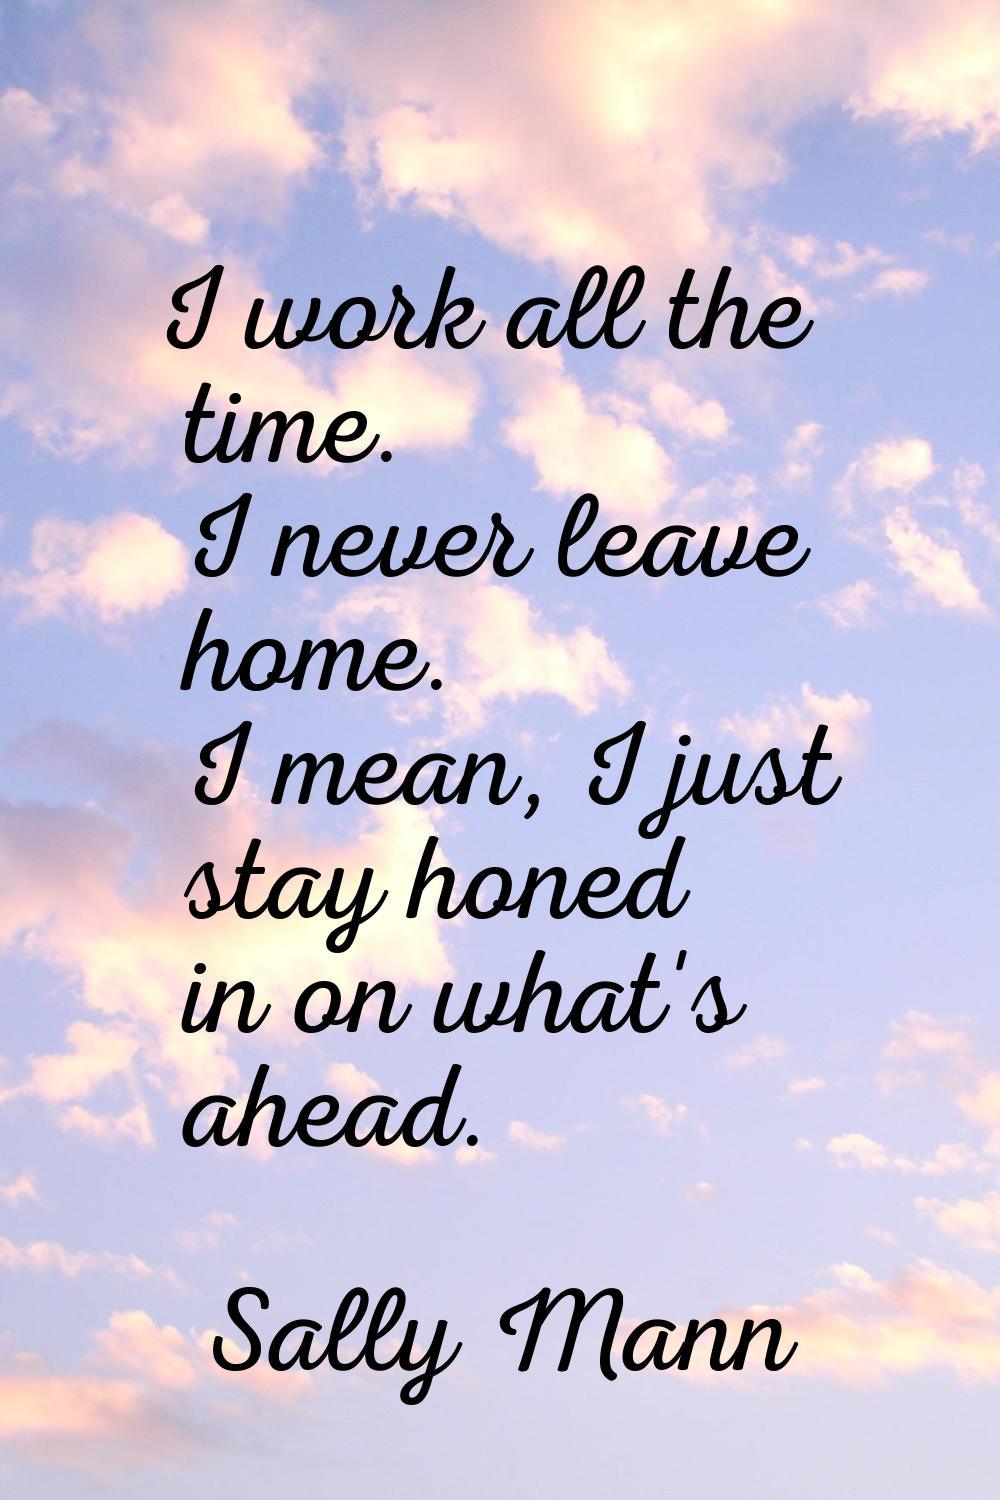 I work all the time. I never leave home. I mean, I just stay honed in on what's ahead.